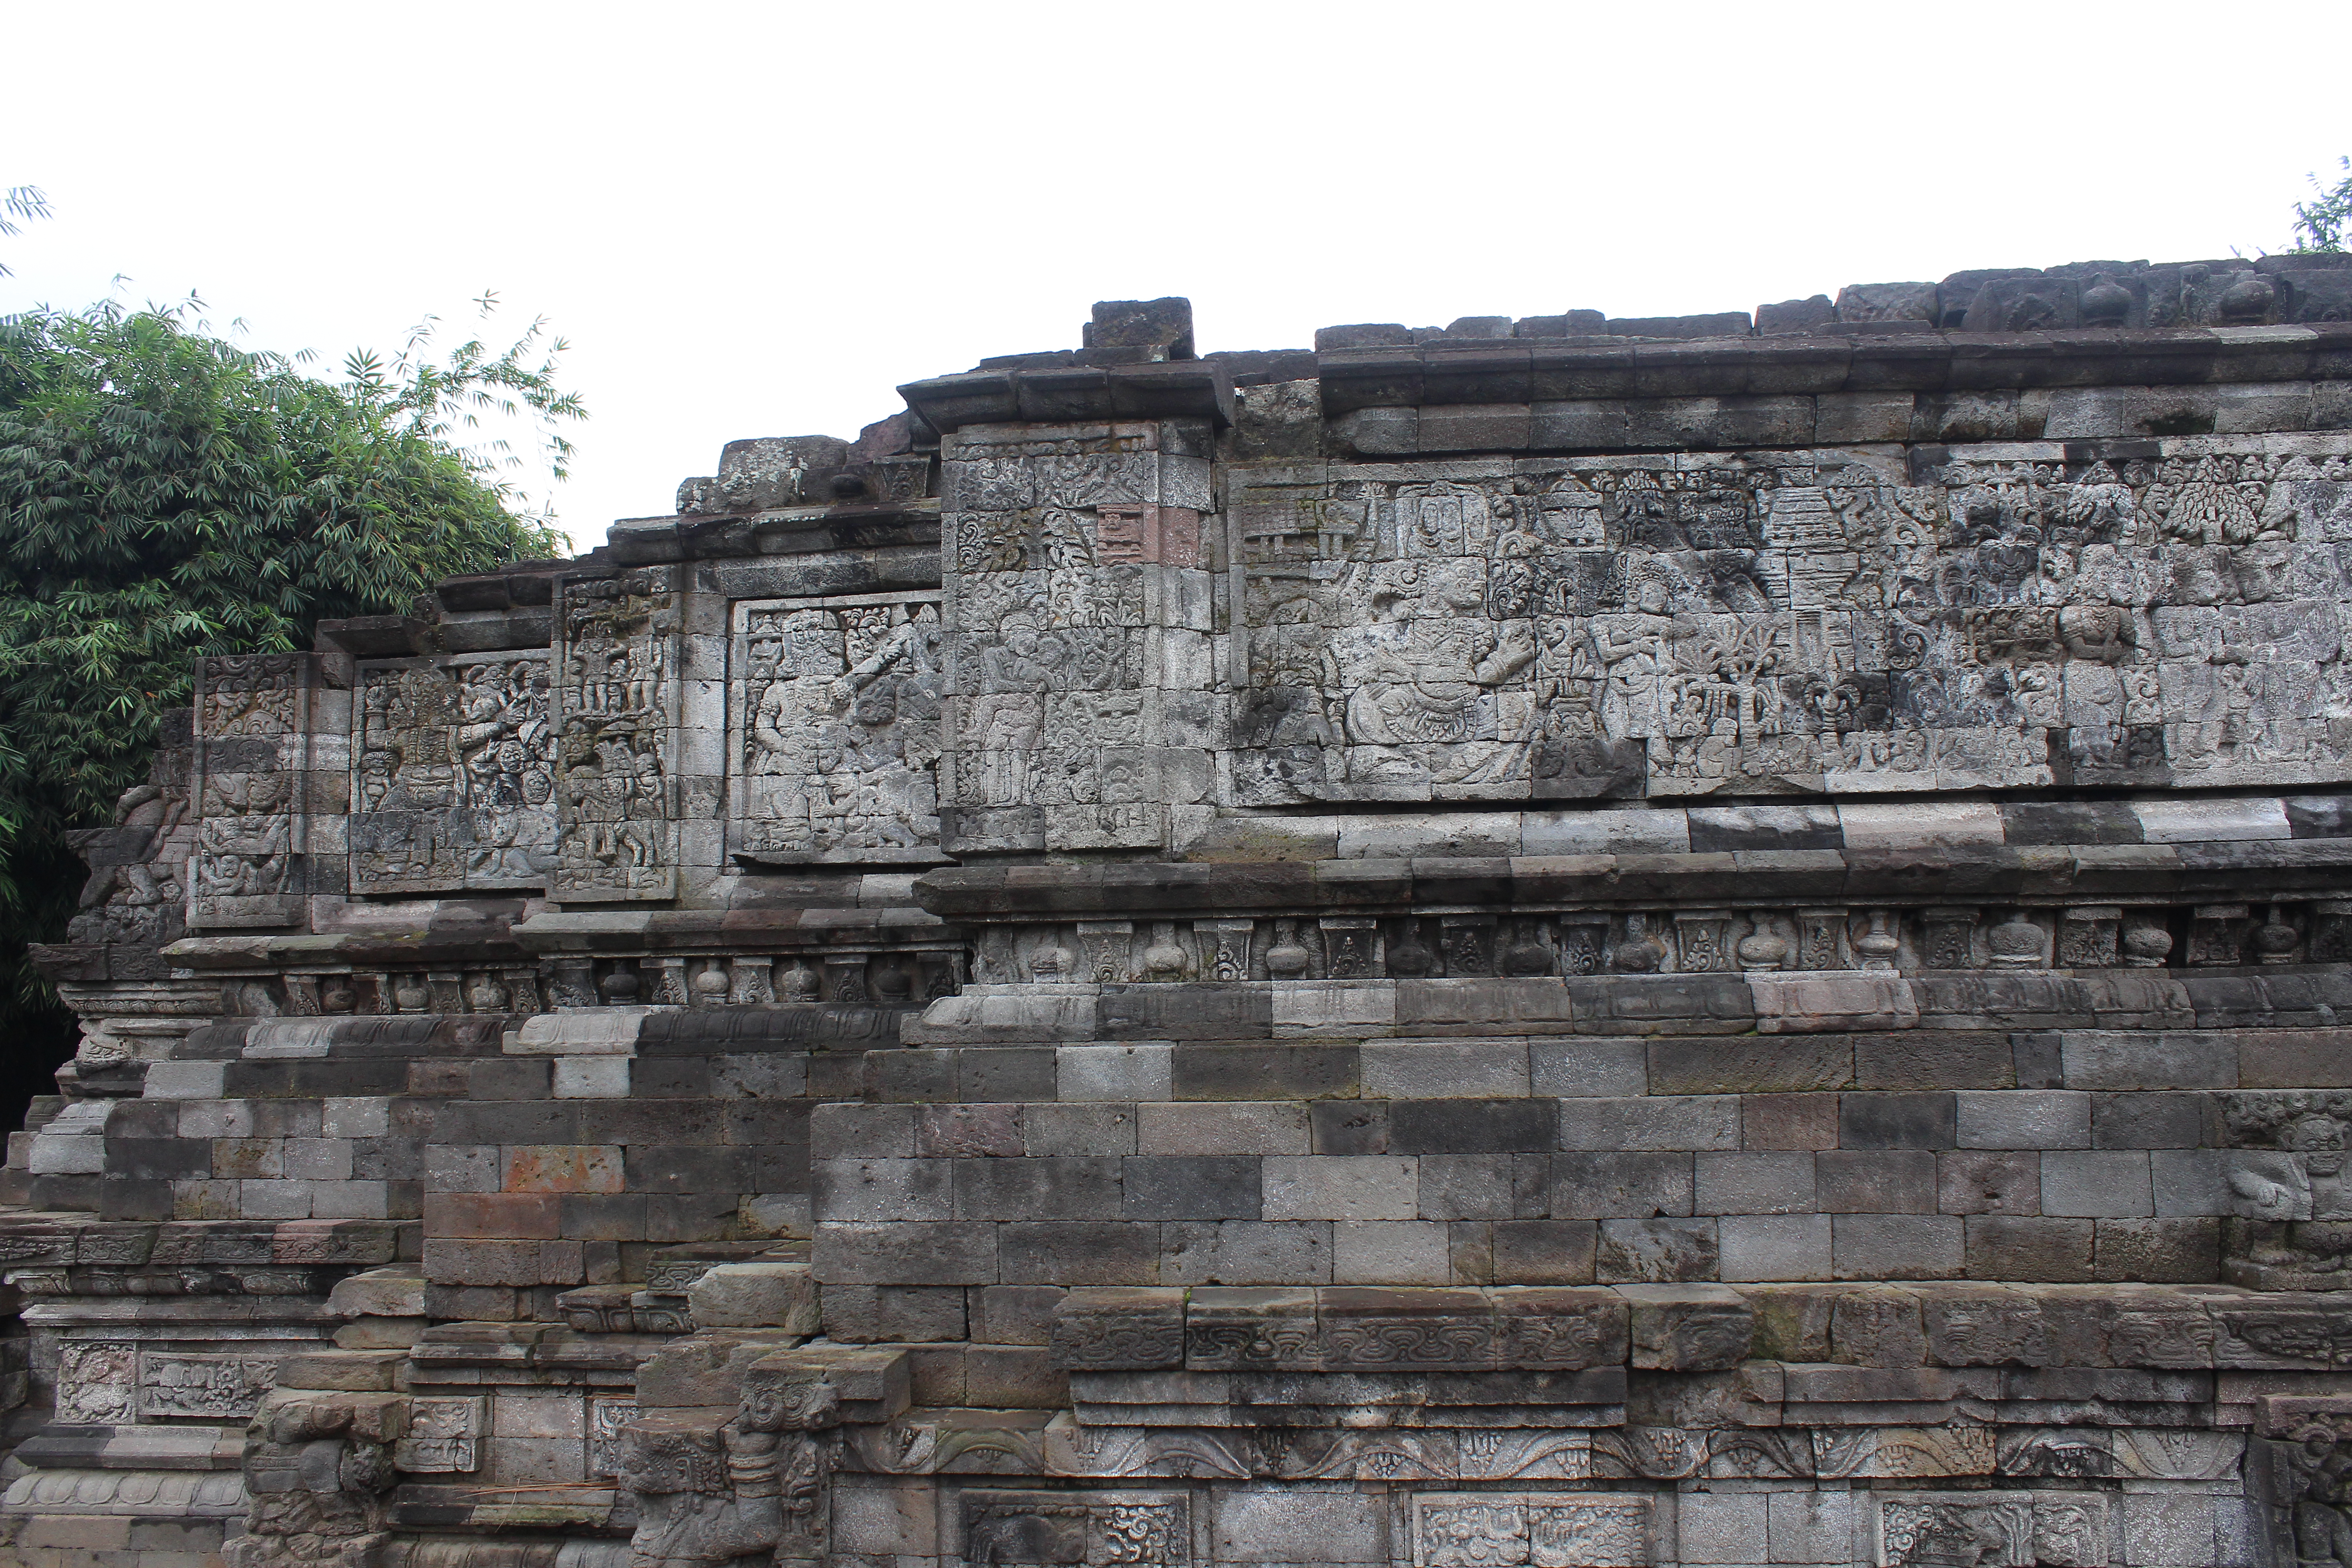 Relief carvings on temple platform